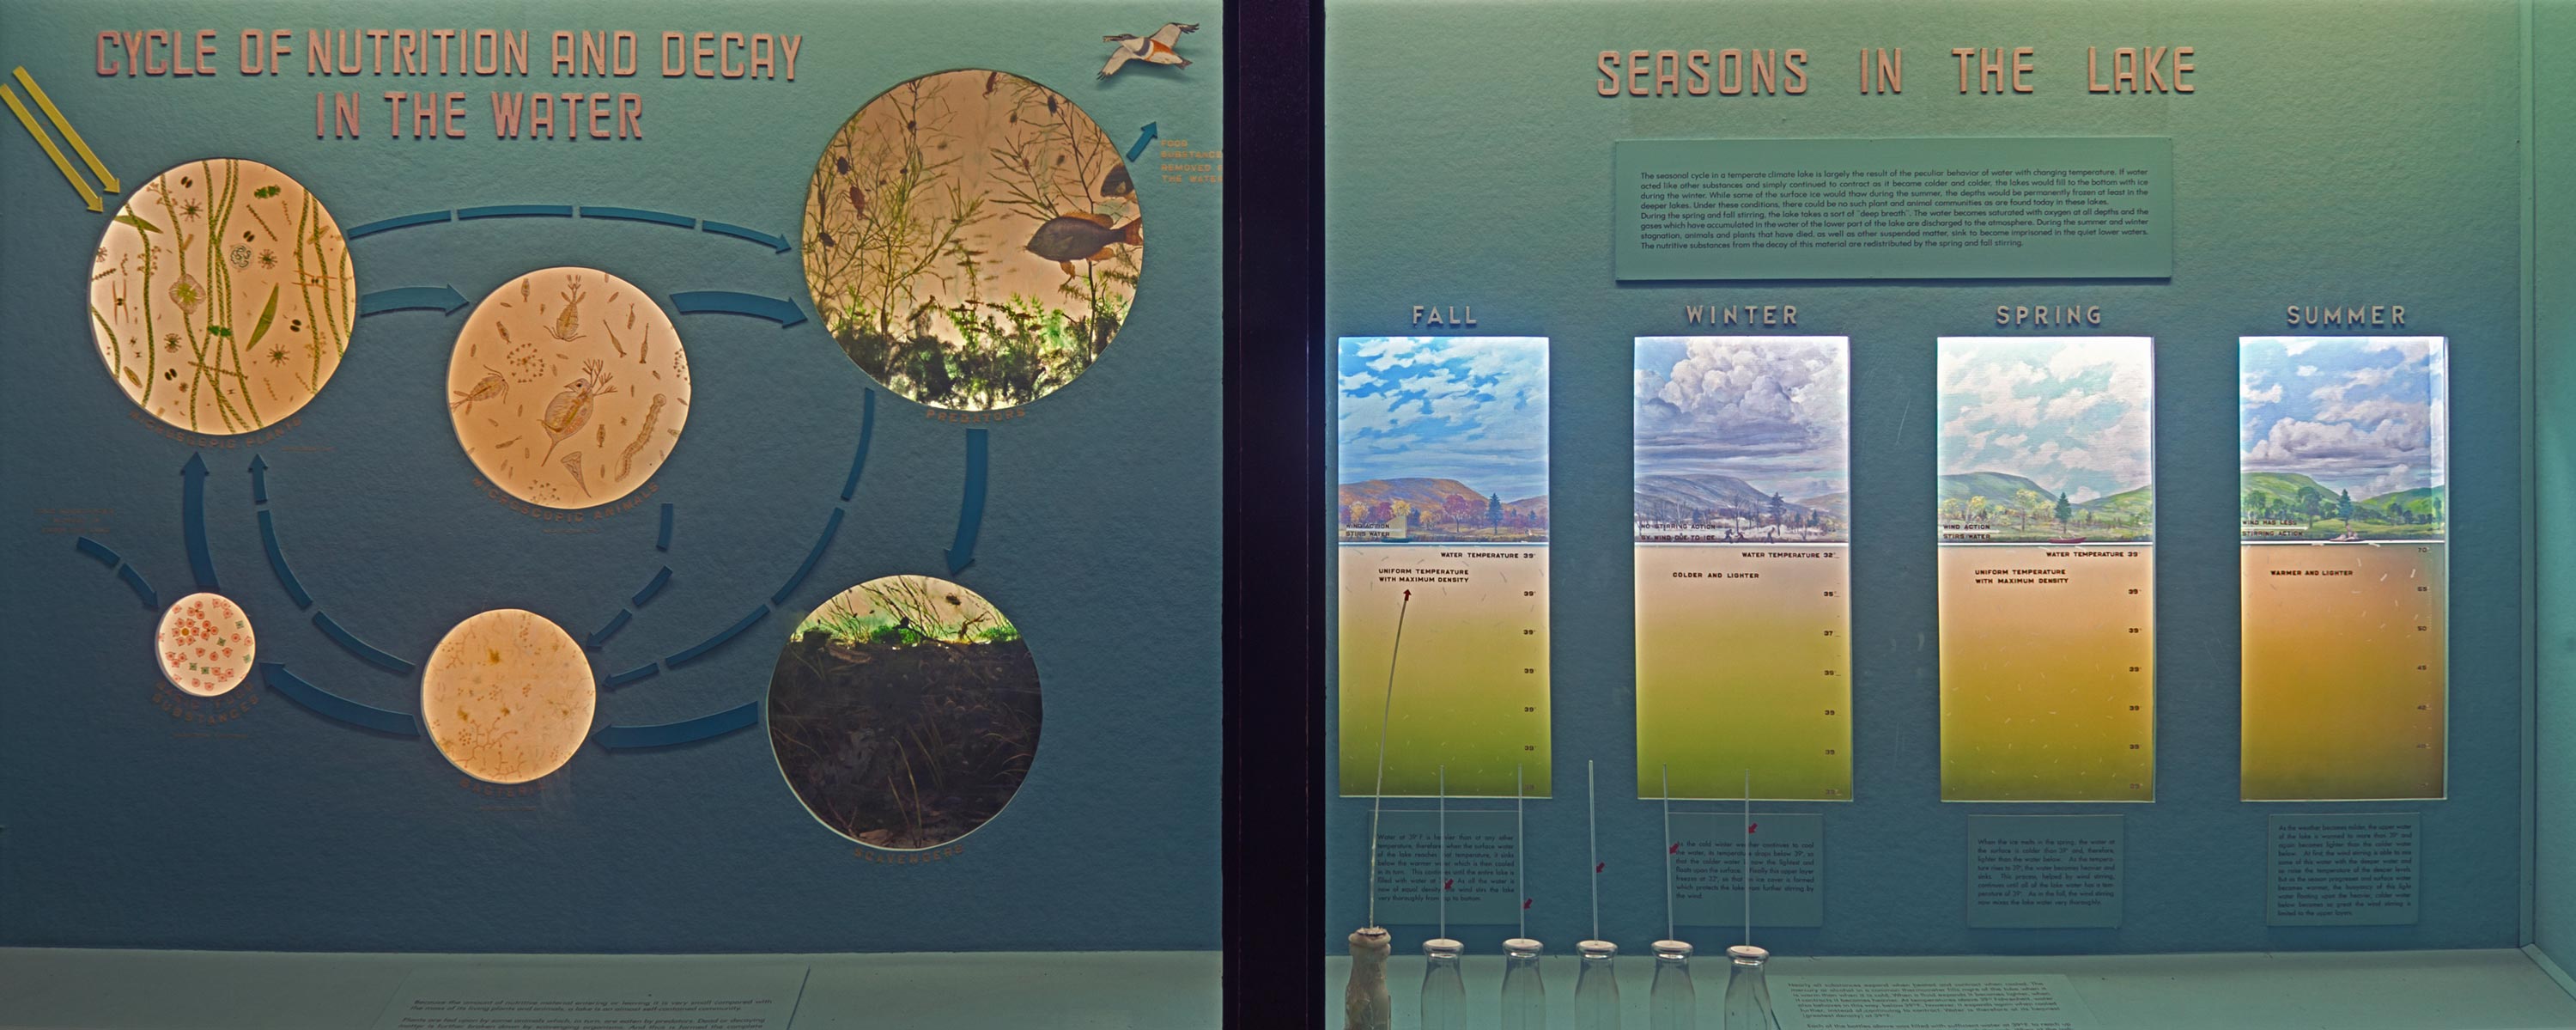 Museum case showing a graphic representing the cycle of nutrition of decay in the water and models of the four seasons in a lake.